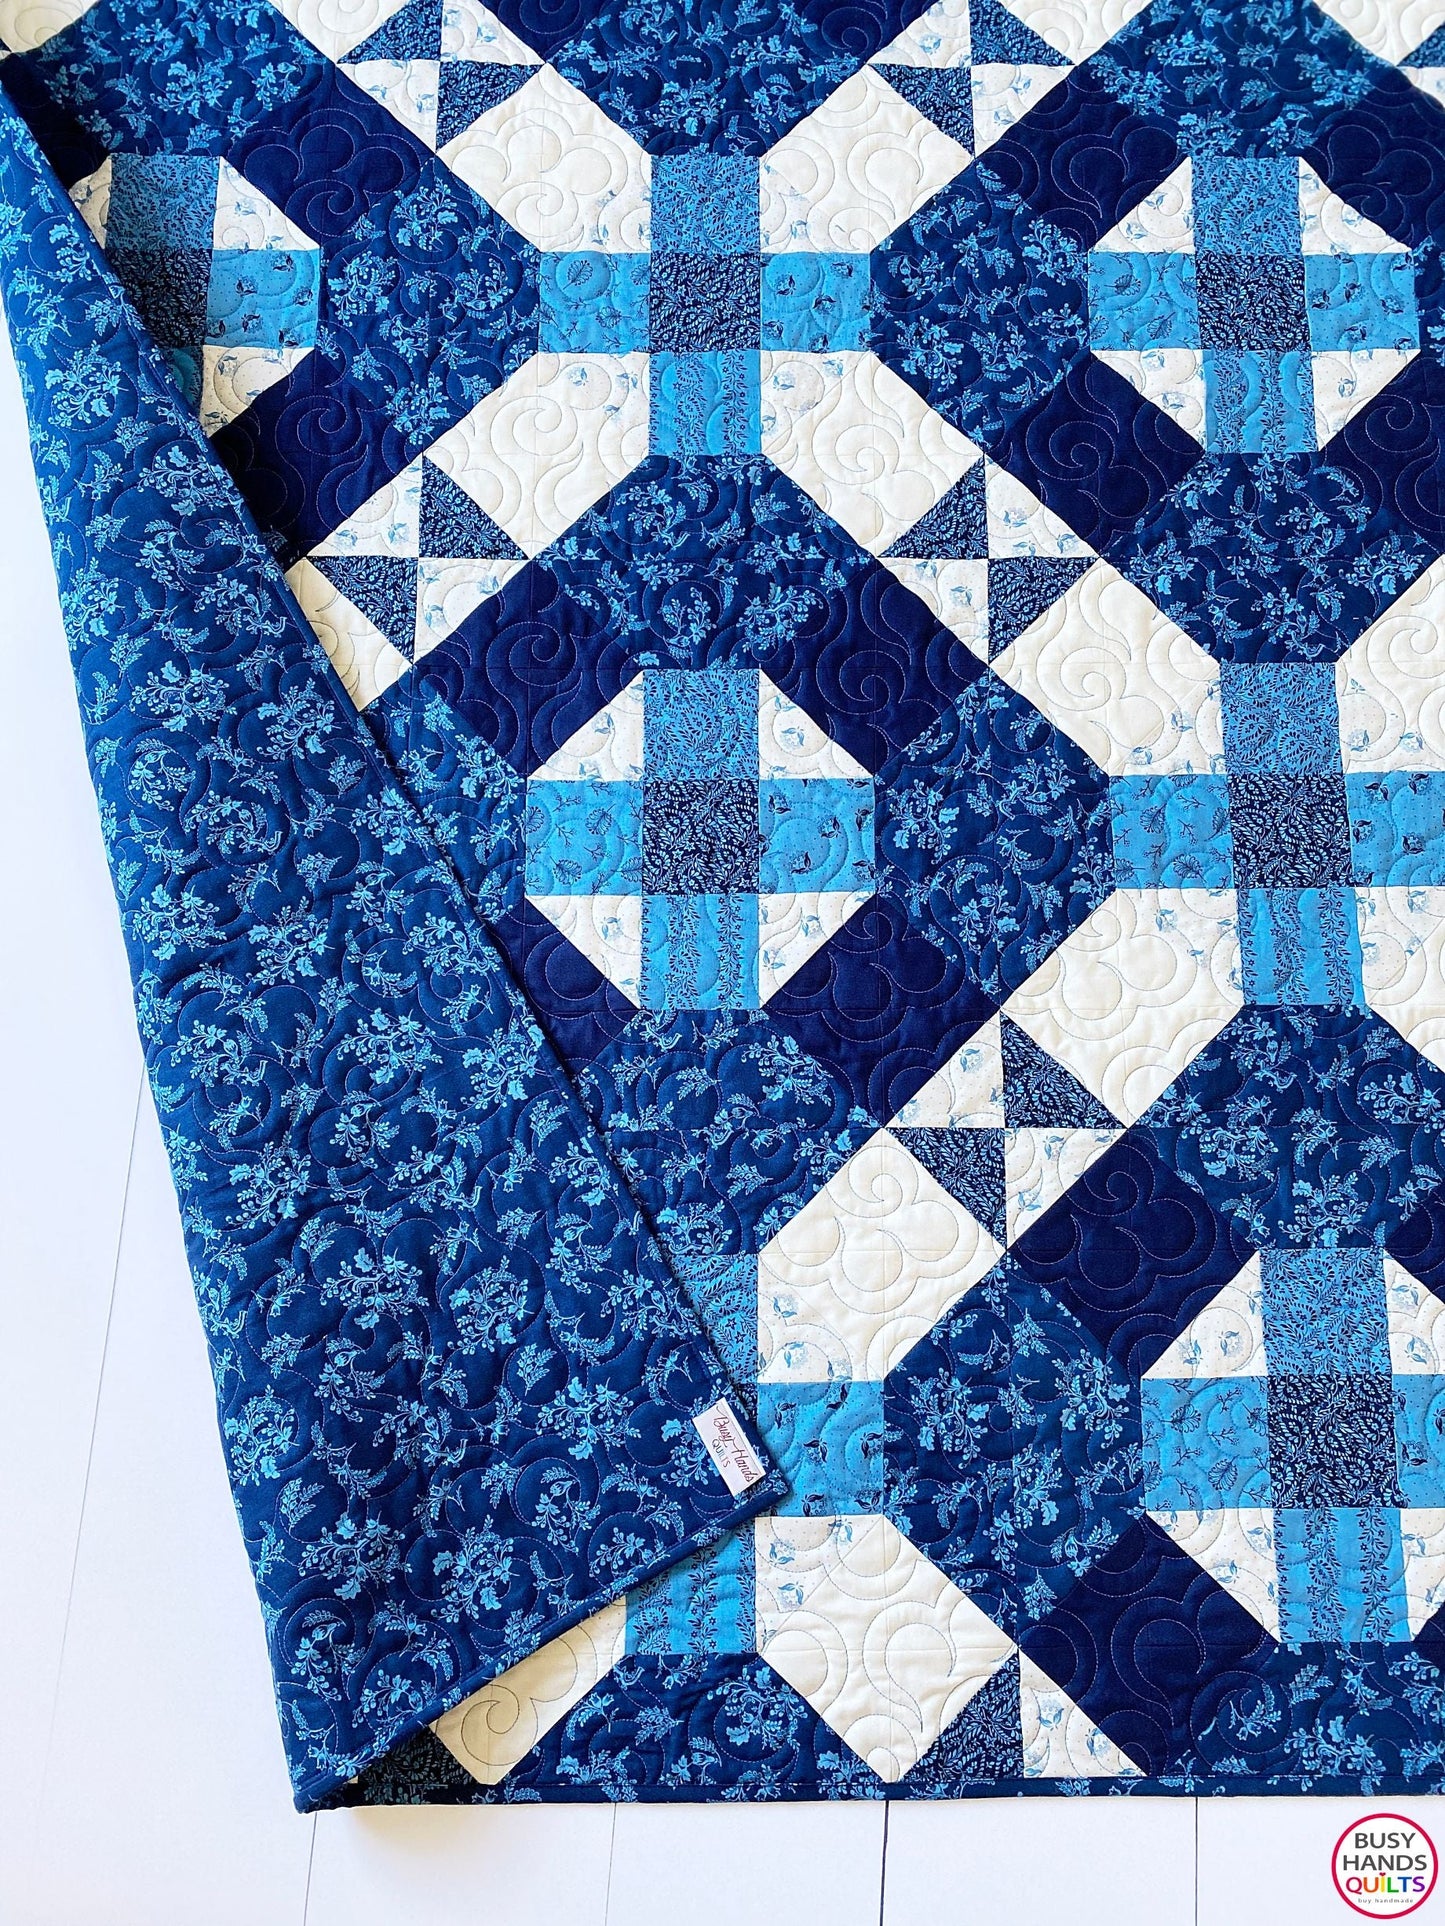 Nantucket Quilt Pattern PDF DOWNLOAD Busy Hands Quilts $12.99